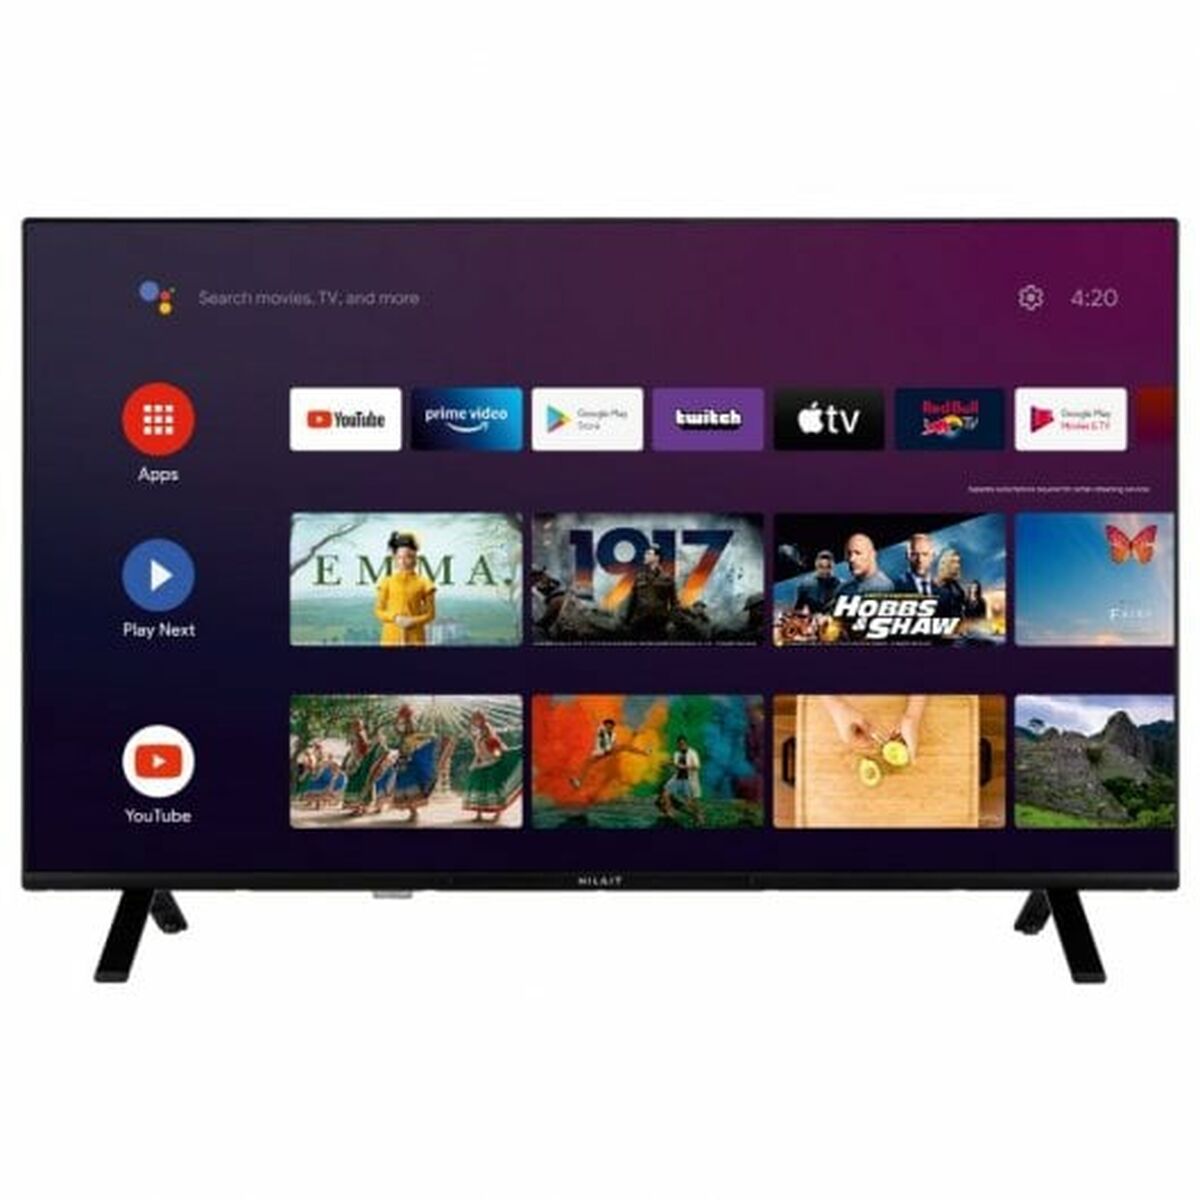 Smart TV Nilait Luxe NI-43UB8001SE 4K Ultra HD 43", Nilait, Electronics, TV, Video and home cinema, smart-tv-nilait-luxe-ni-43ub8001se-4k-ultra-hd-43, Brand_Nilait, category-reference-2609, category-reference-2625, category-reference-2931, category-reference-t-18805, category-reference-t-19653, cinema and television, Condition_NEW, entertainment, Price_300 - 400, RiotNook